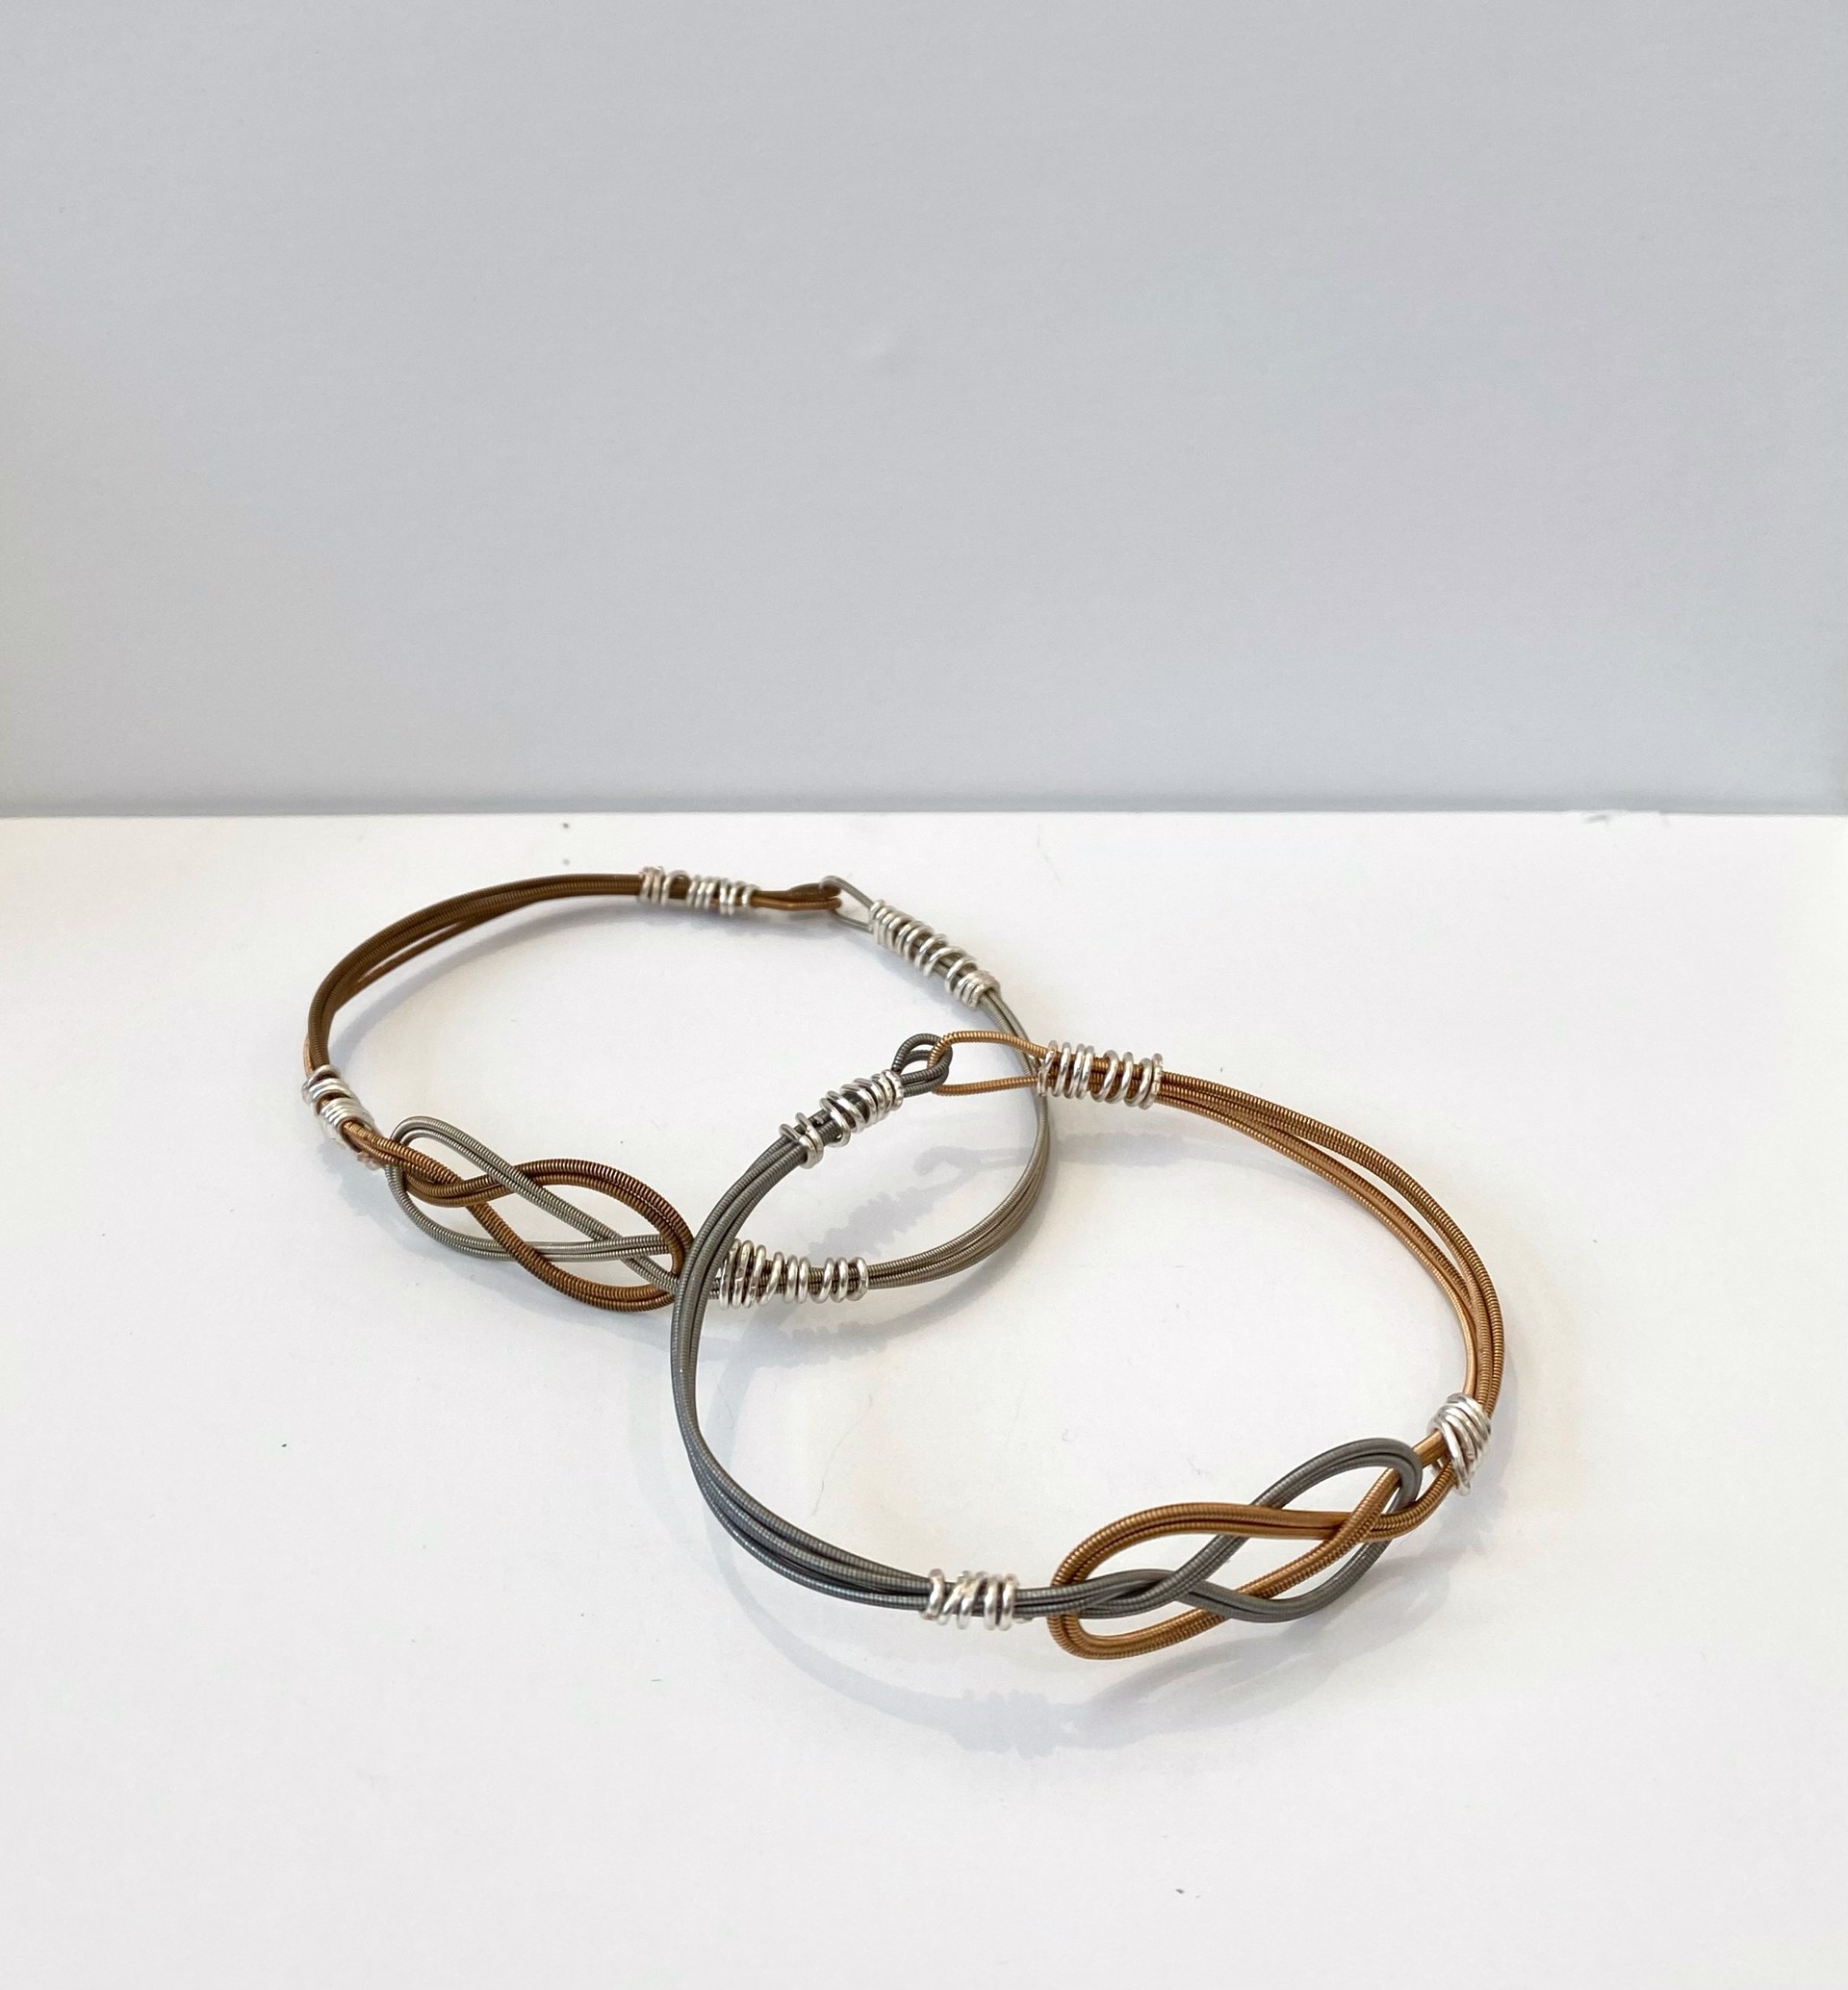 Guitar String Bracelet Gold and Silver by String Thing Designs